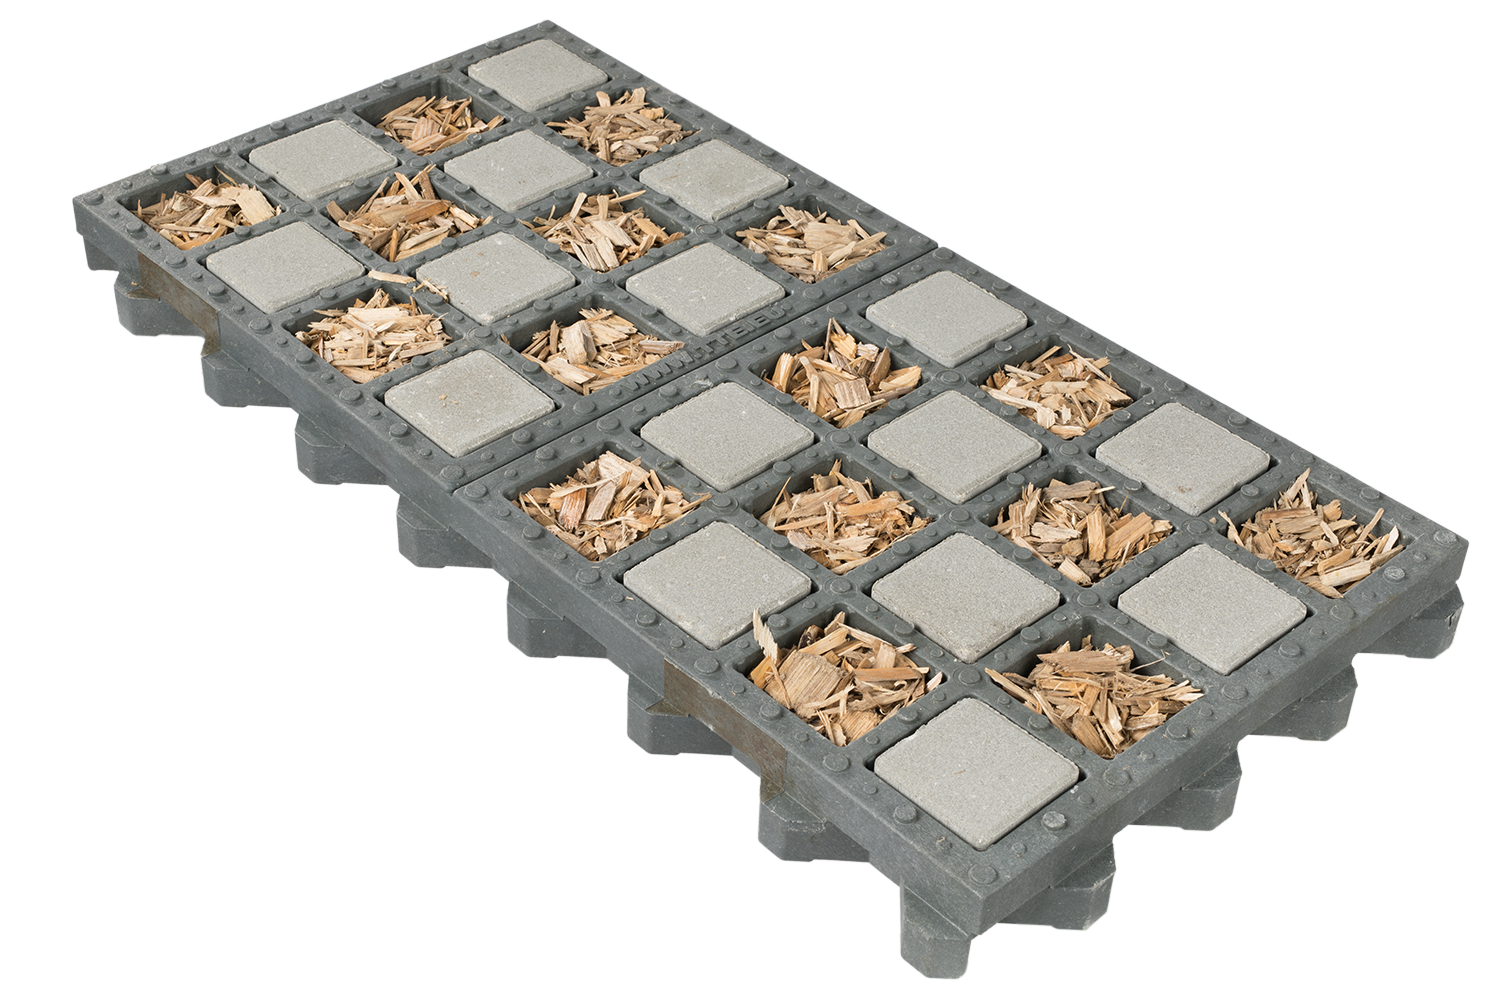 TTE® filled with 50% paving stones and 50% wood chips                     